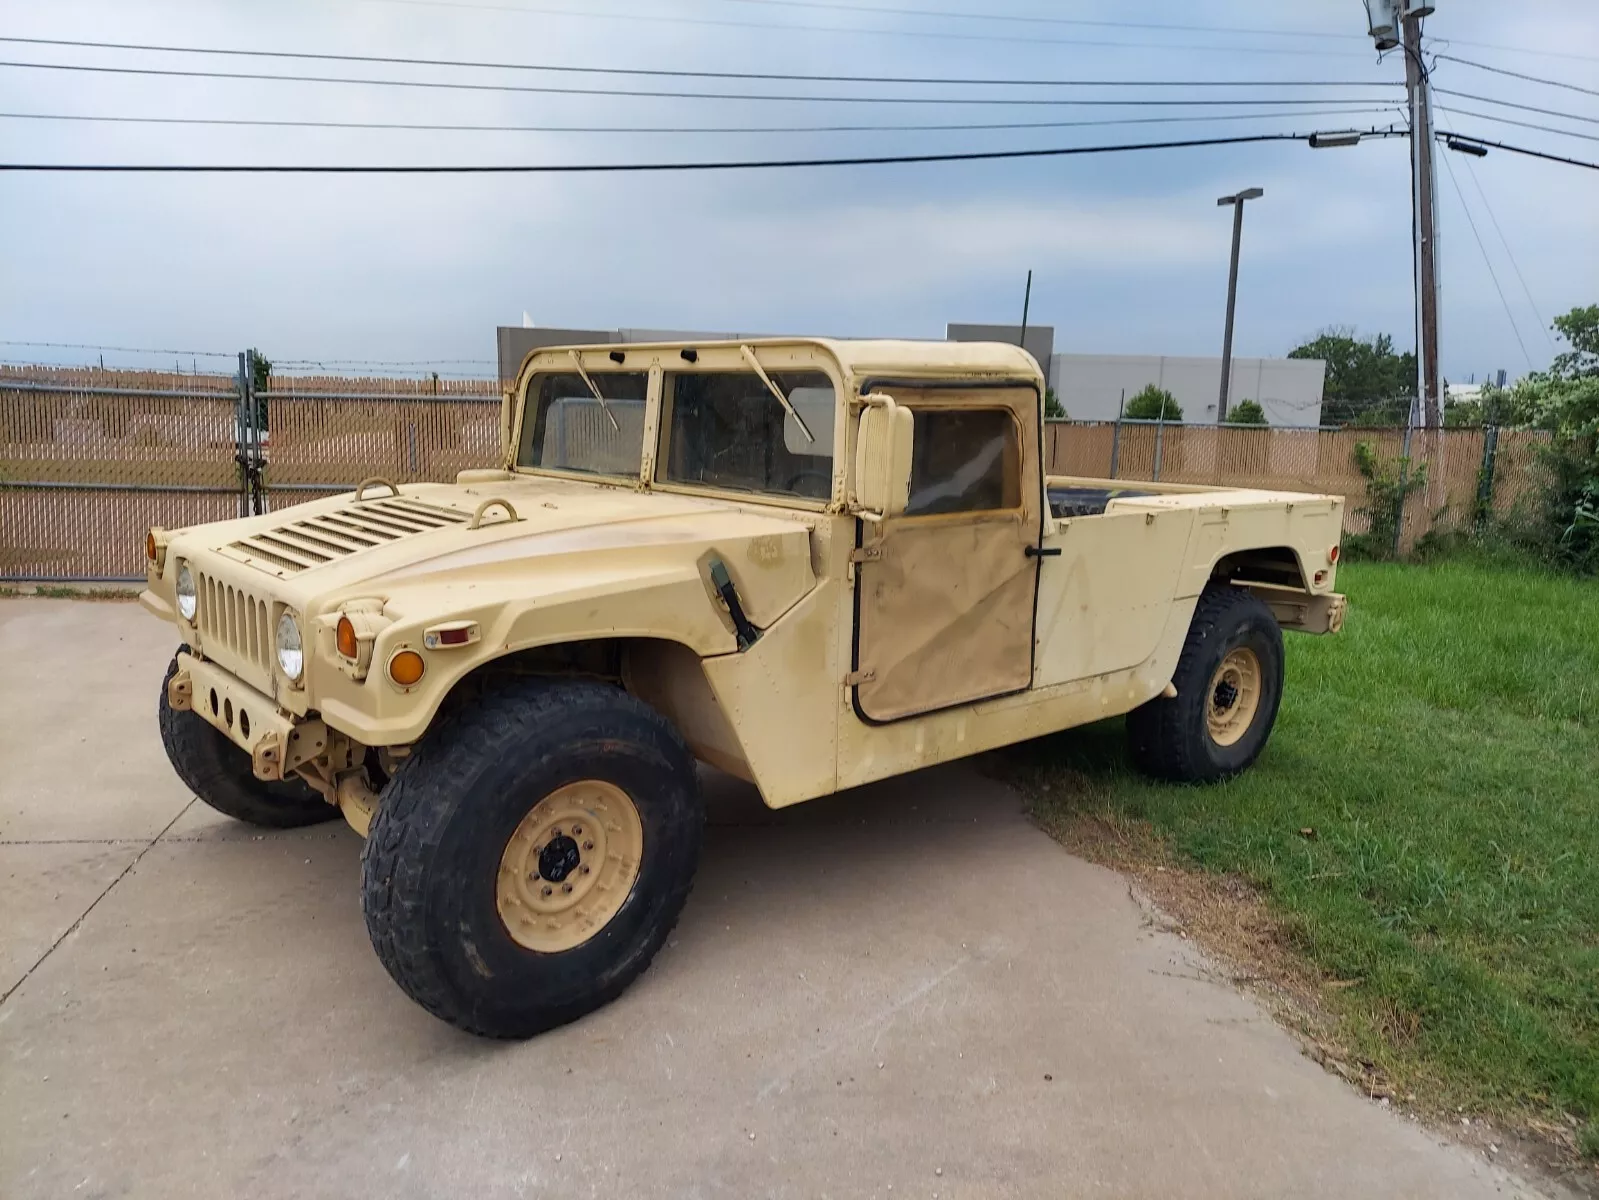 2006 Am General Hmmwv M1097 Heavy Variant Military Hummer Complete w/ Doors, Top for sale